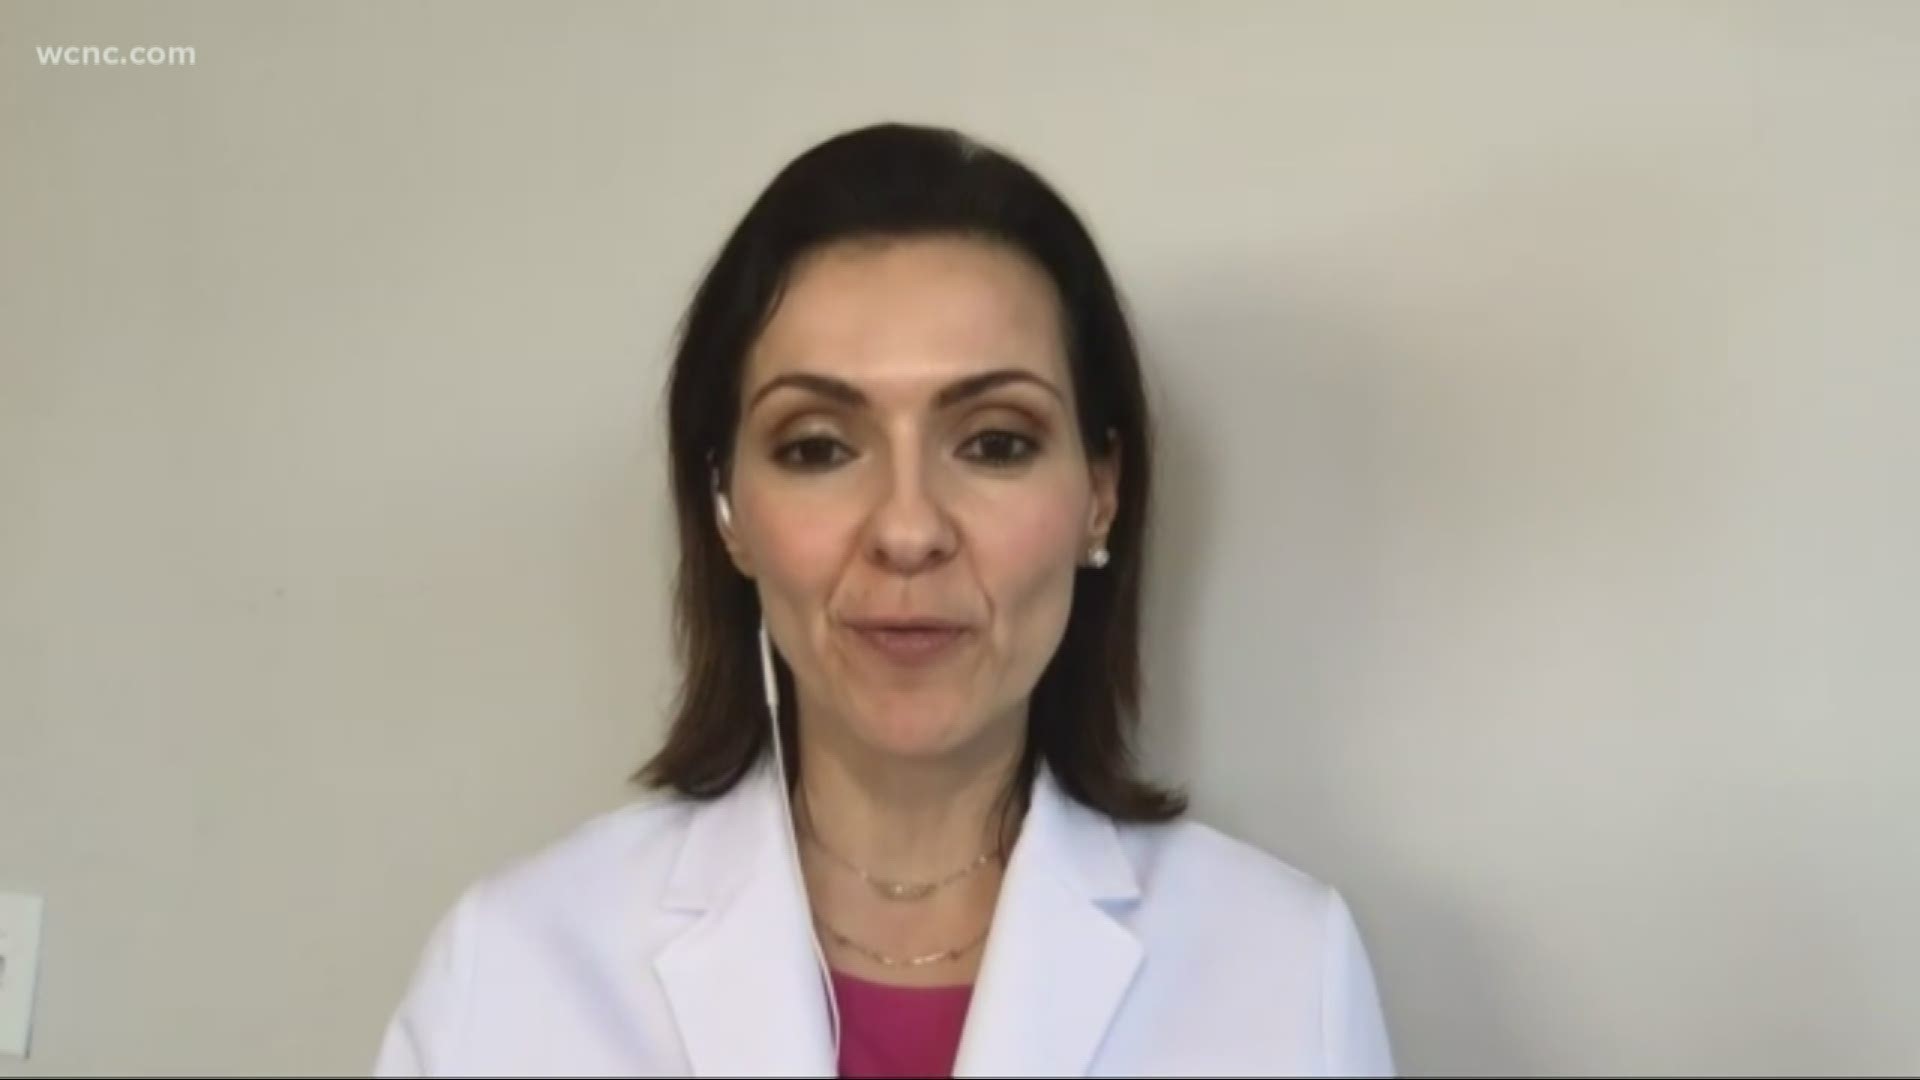 With the number of COVID-19 cases on the rise, so are questions about the virus. A Charlotte doctor is answering your questions about symptoms and who is at risk.